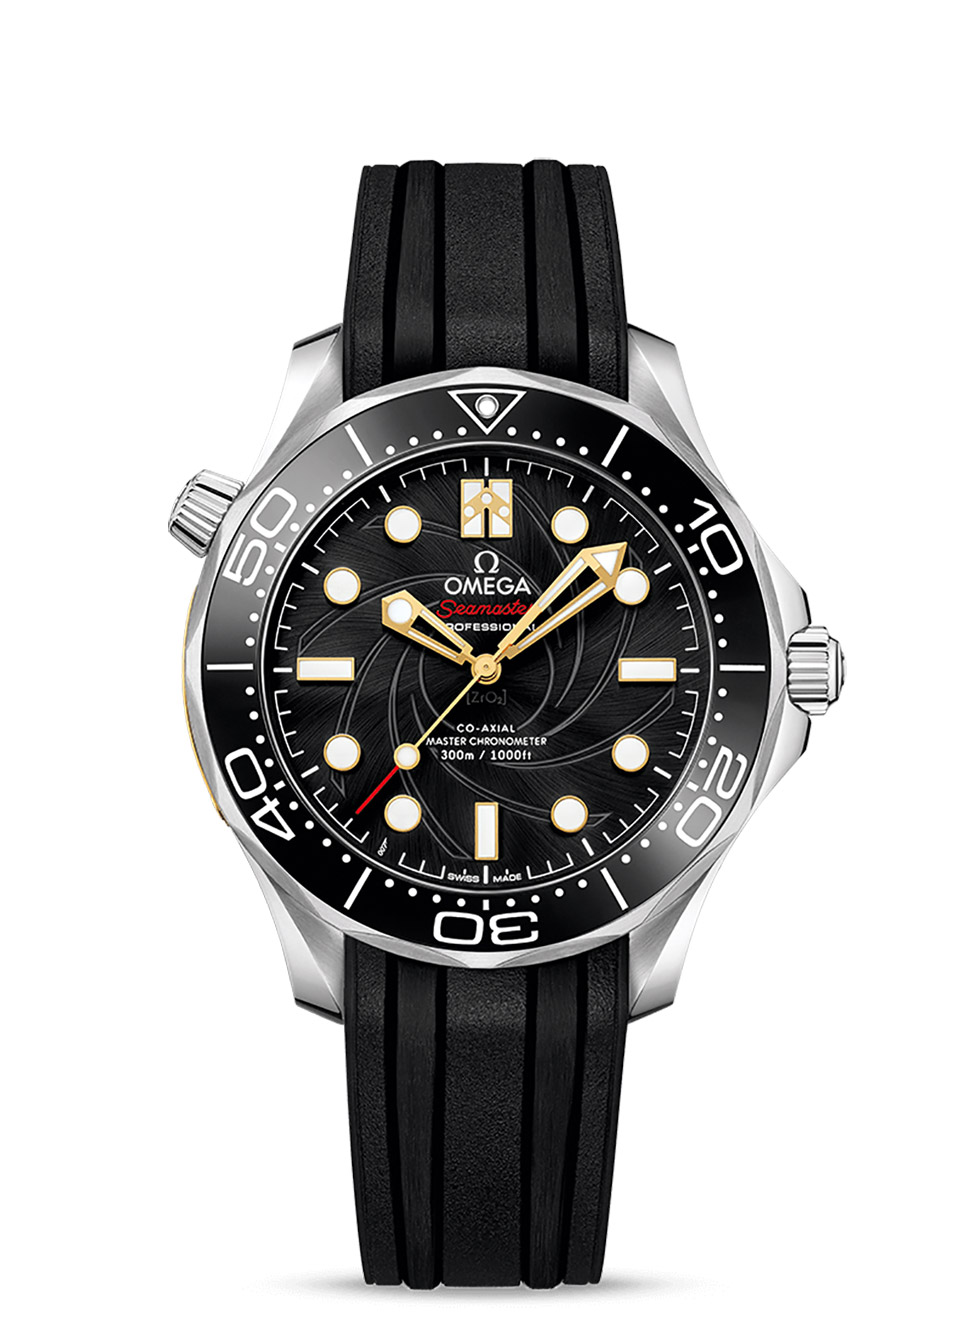 Omega Seamaster Diver 300M James Bond Limited Edition Watch Review